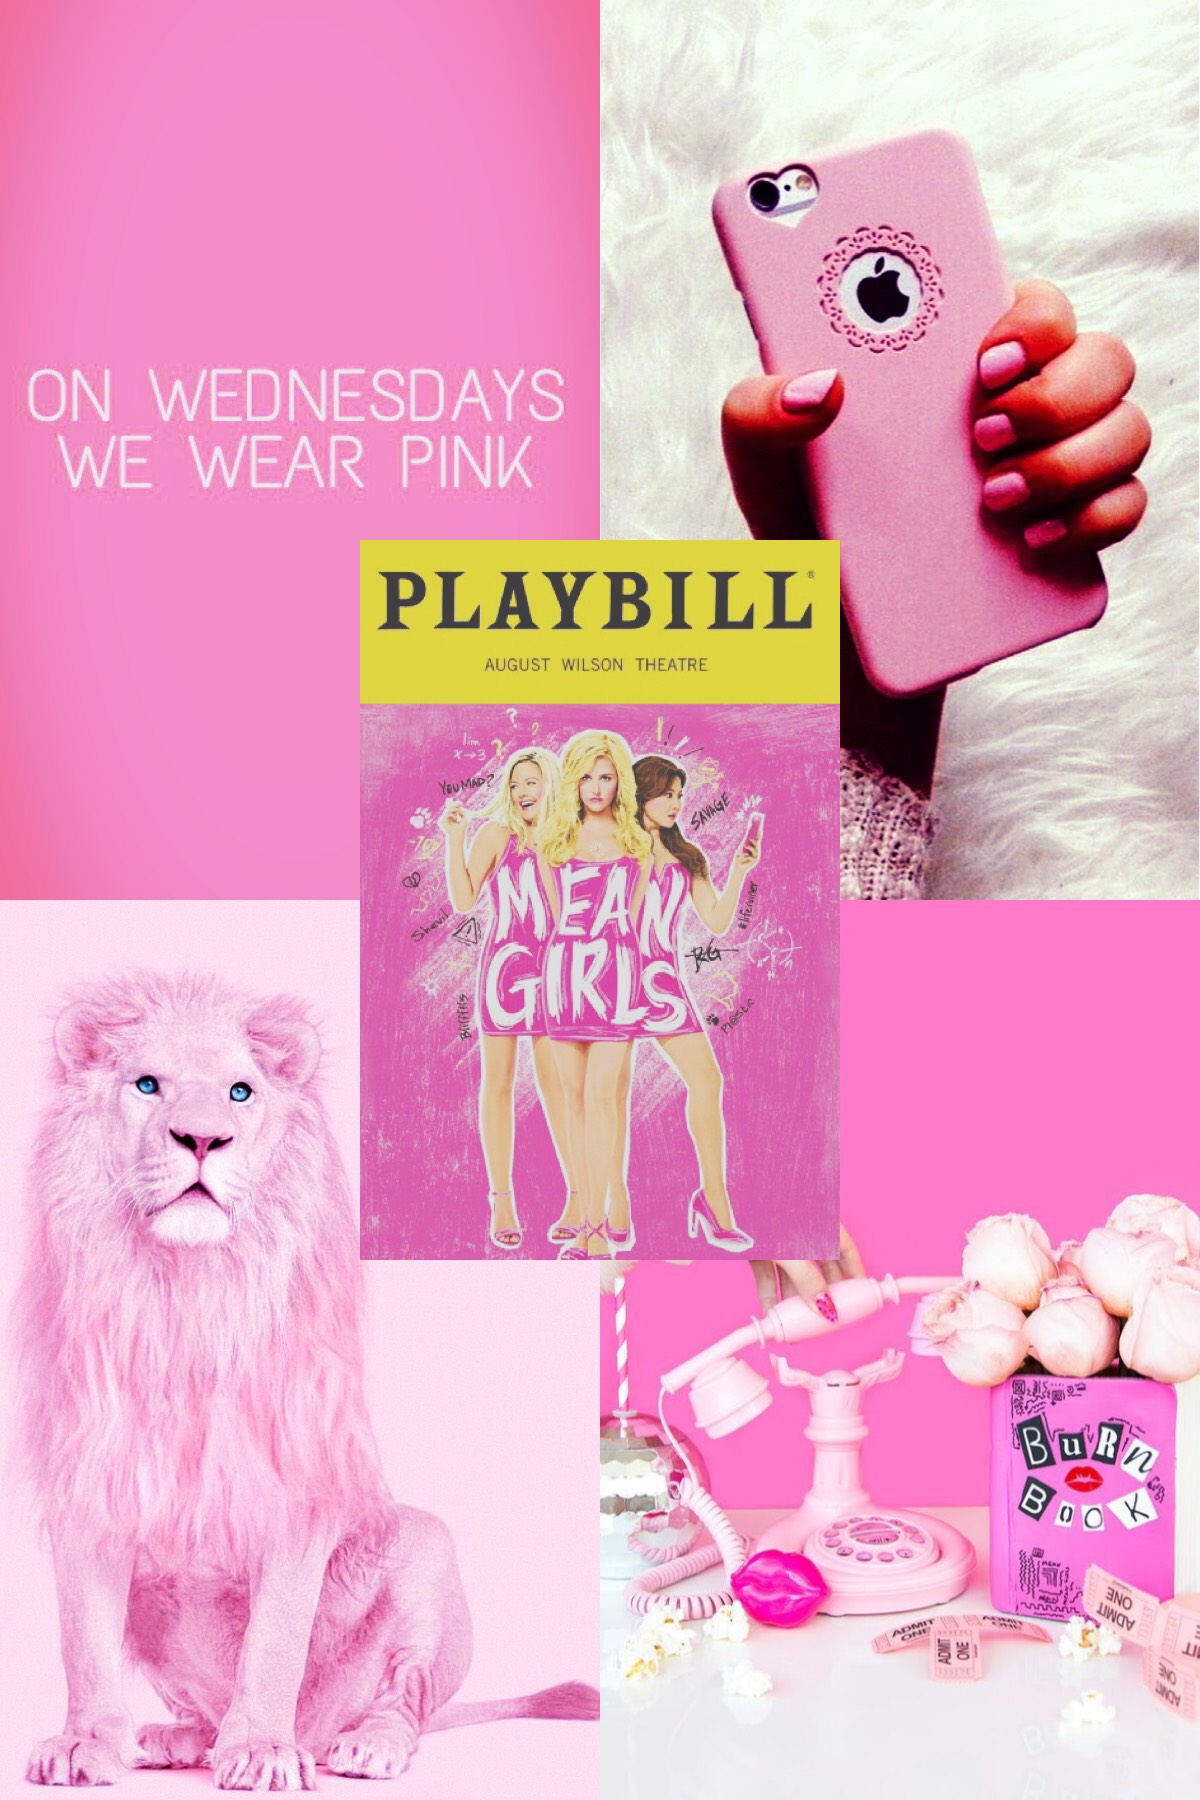 You can’t sit with us. 
-
Here’s an aesthetic from Mean Girls the musical!!